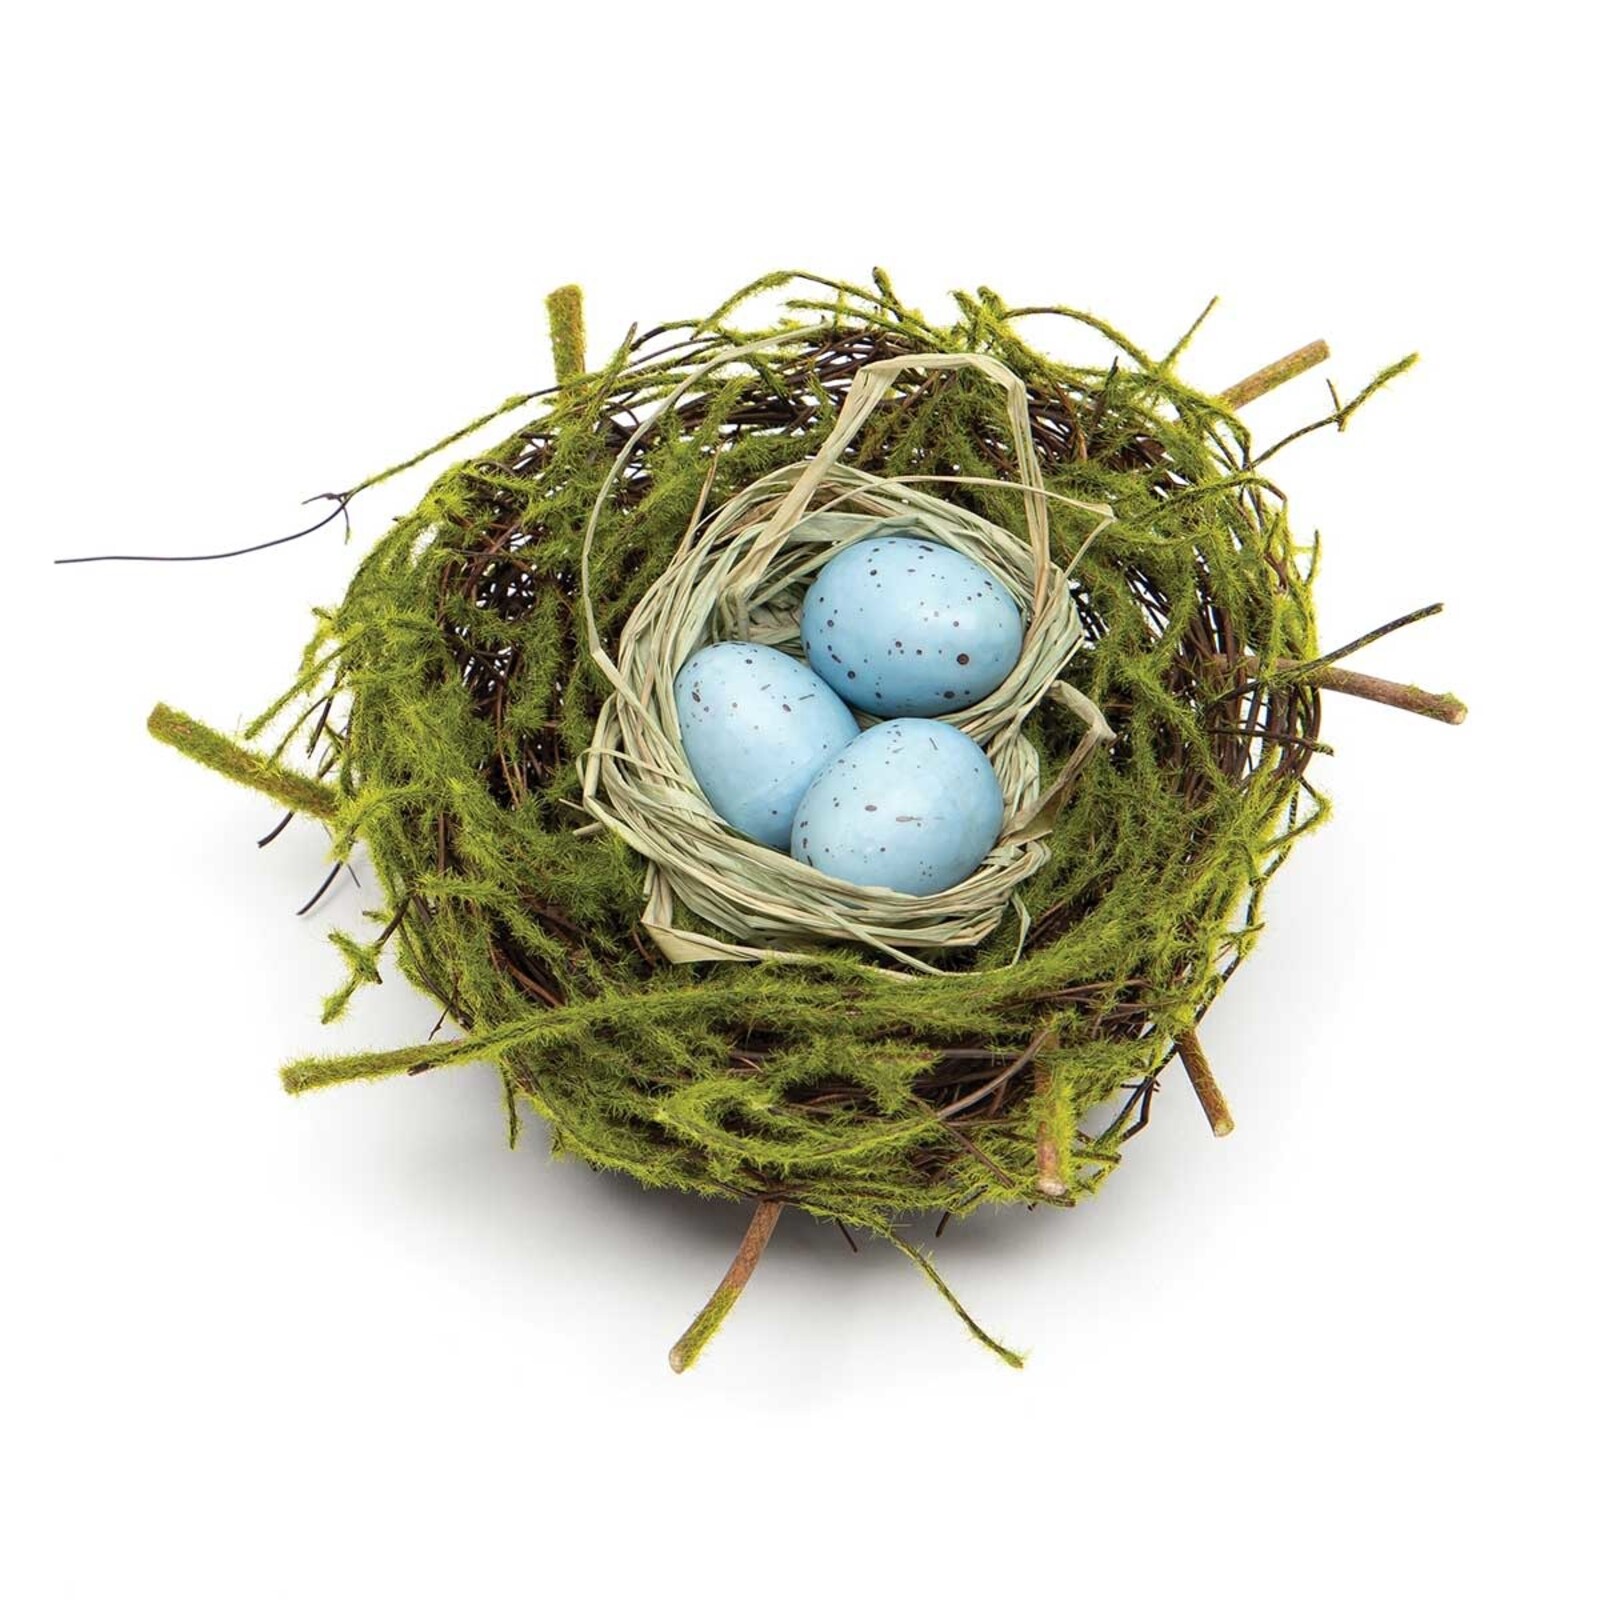 Meravic Twig Birds Nest with Blue  Eggs  T5210BL loading=